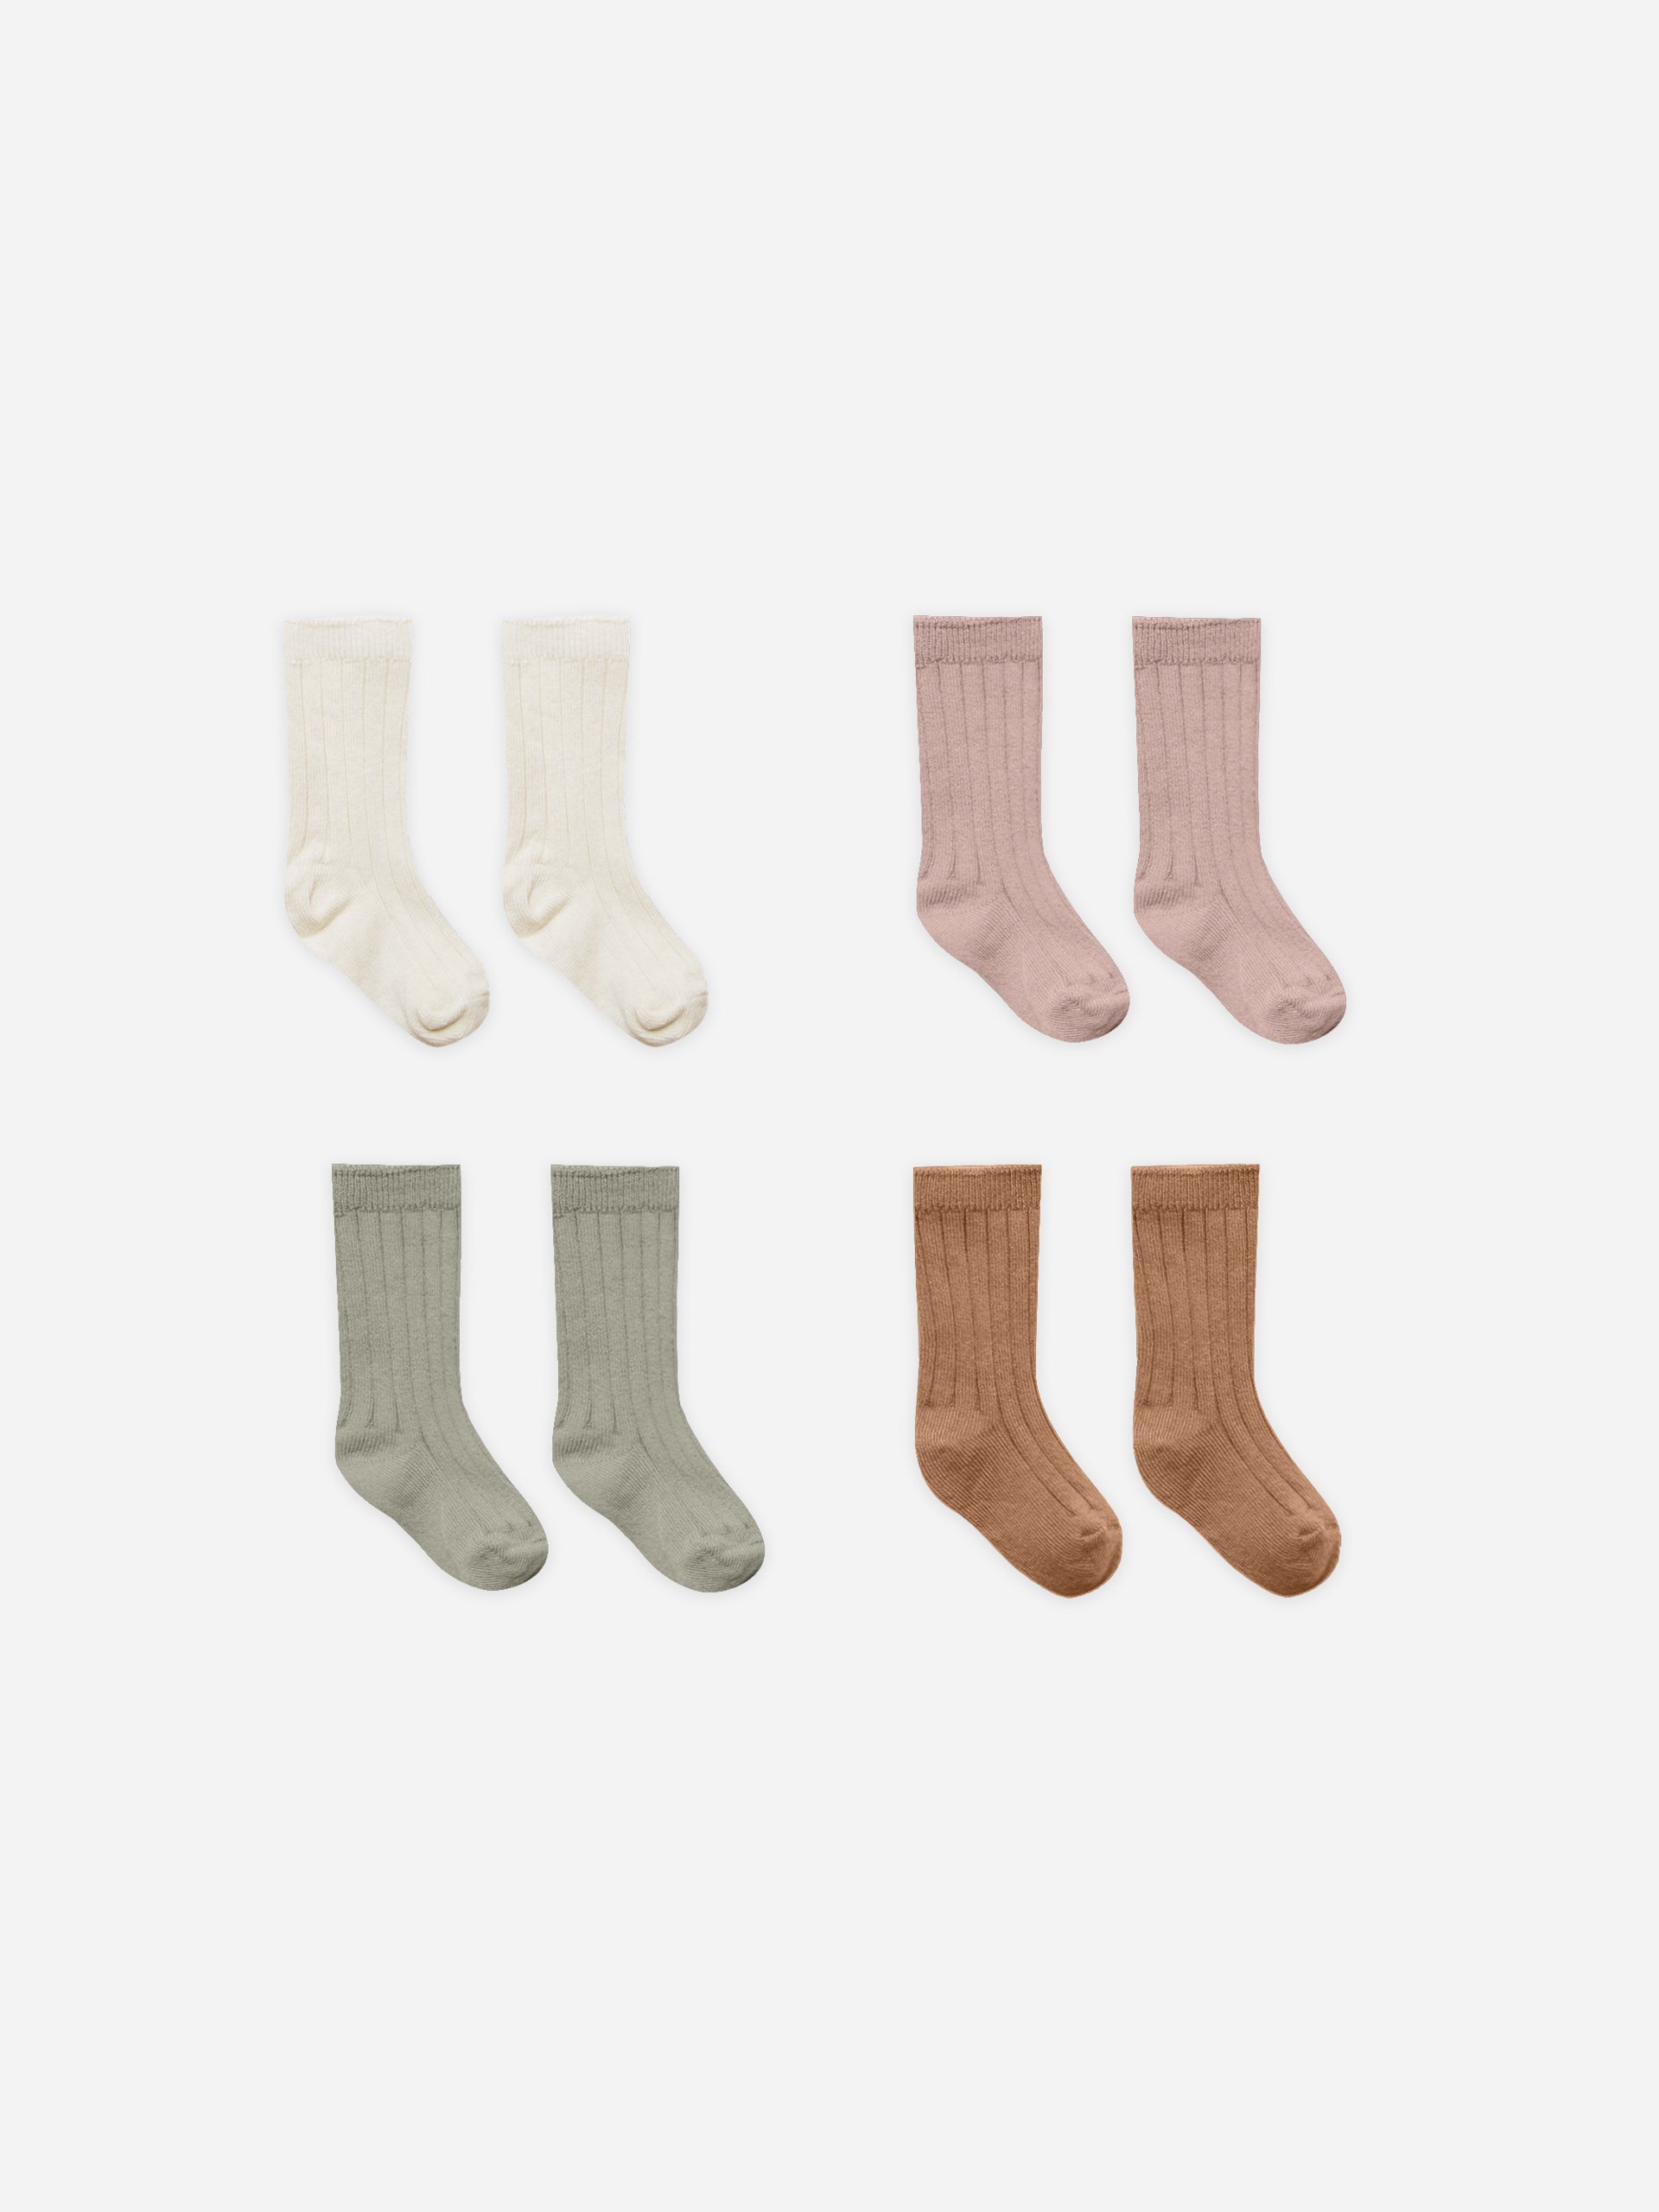 Socks, Set Of 4 || Natural, Mauve, Basil, Cinnamon - Rylee + Cru | Kids Clothes | Trendy Baby Clothes | Modern Infant Outfits |